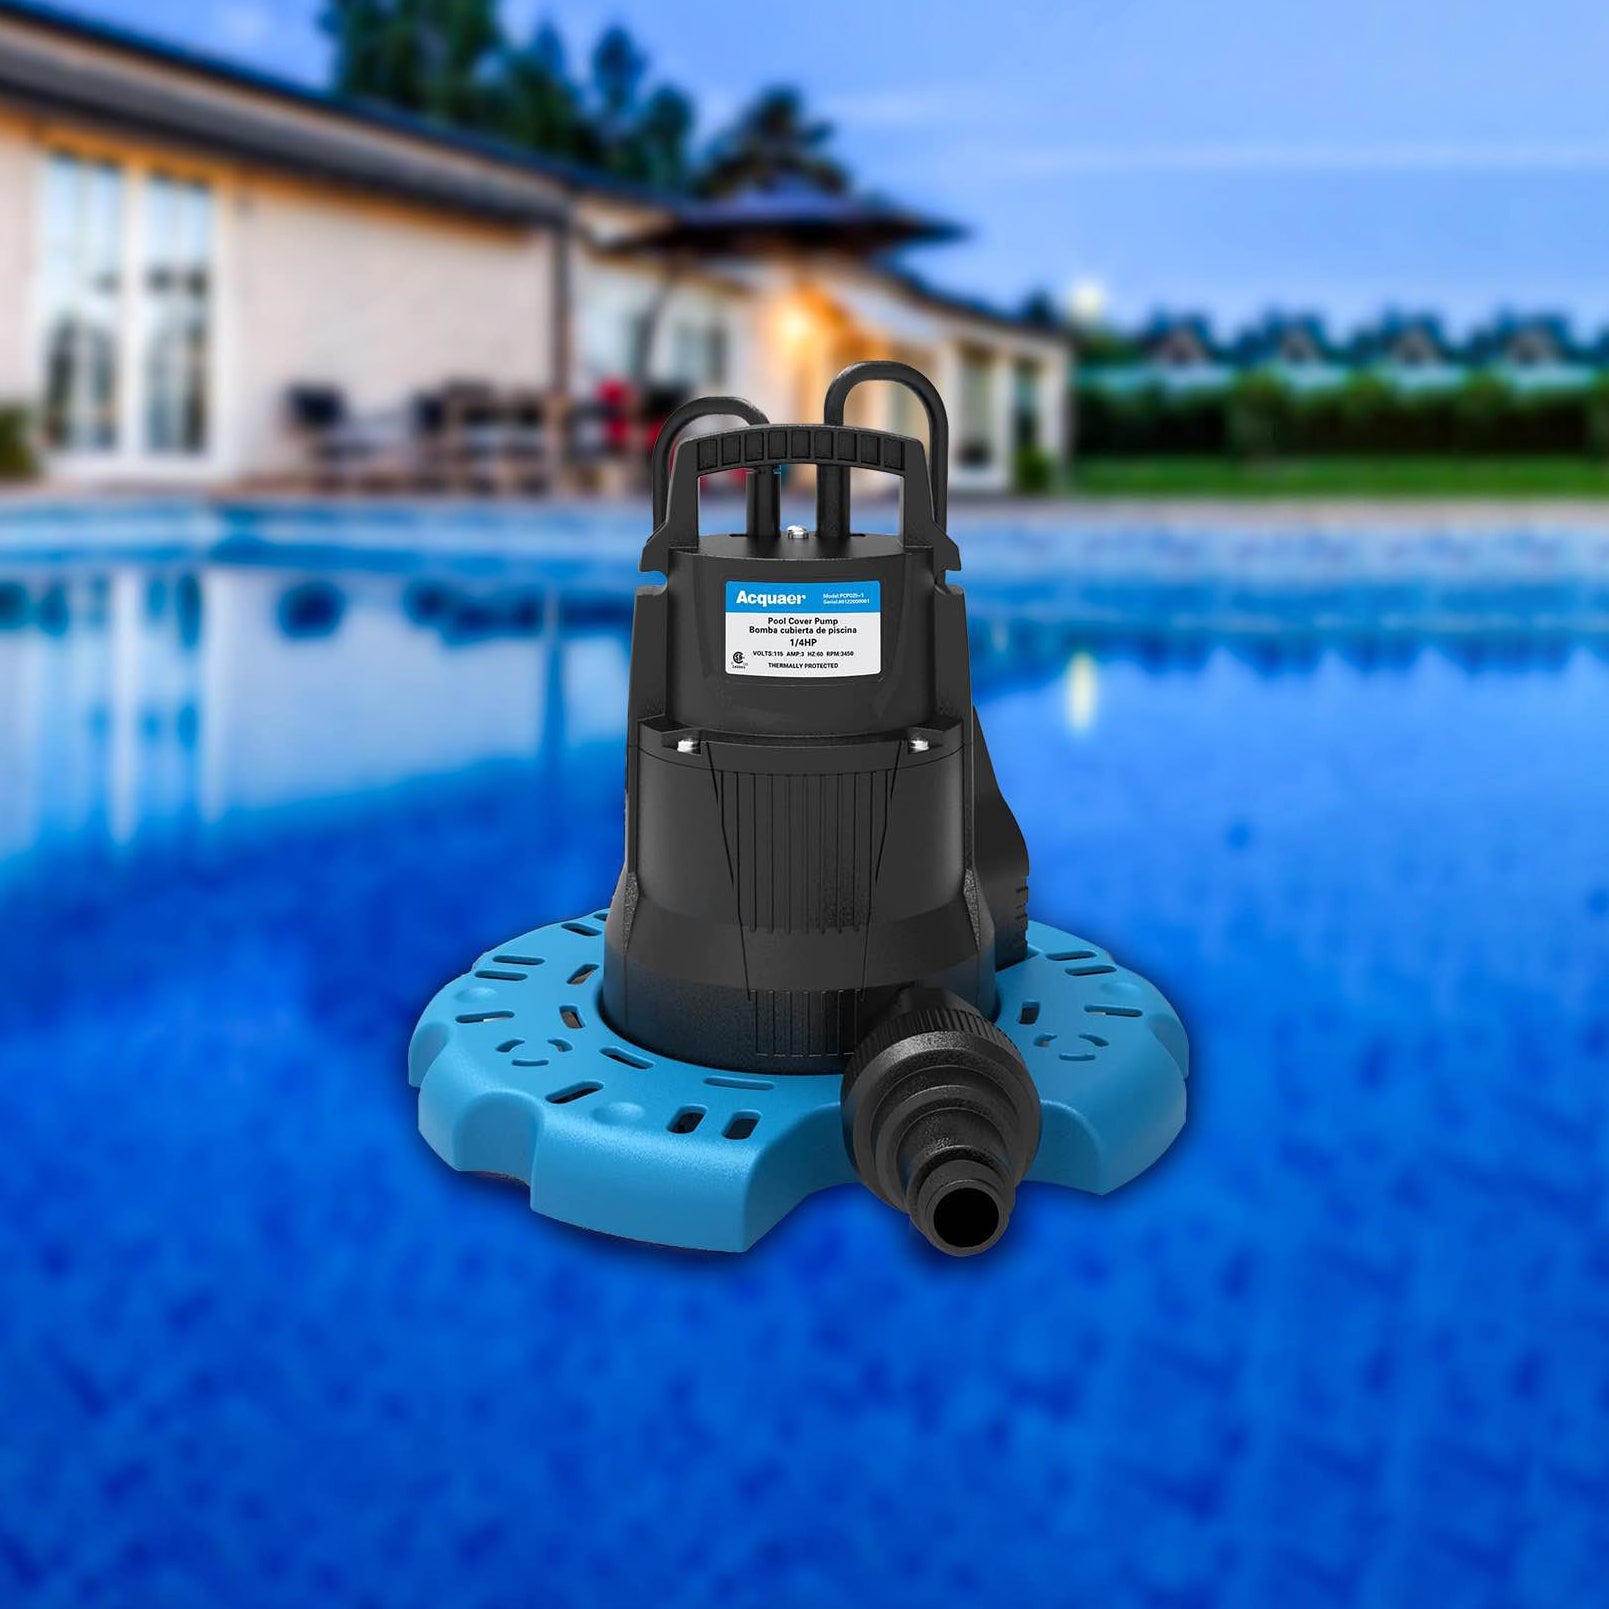 Acquaer 115-Volt, 1/4 HP, 2250 GPH, Automatic, Submersible, Swimming P